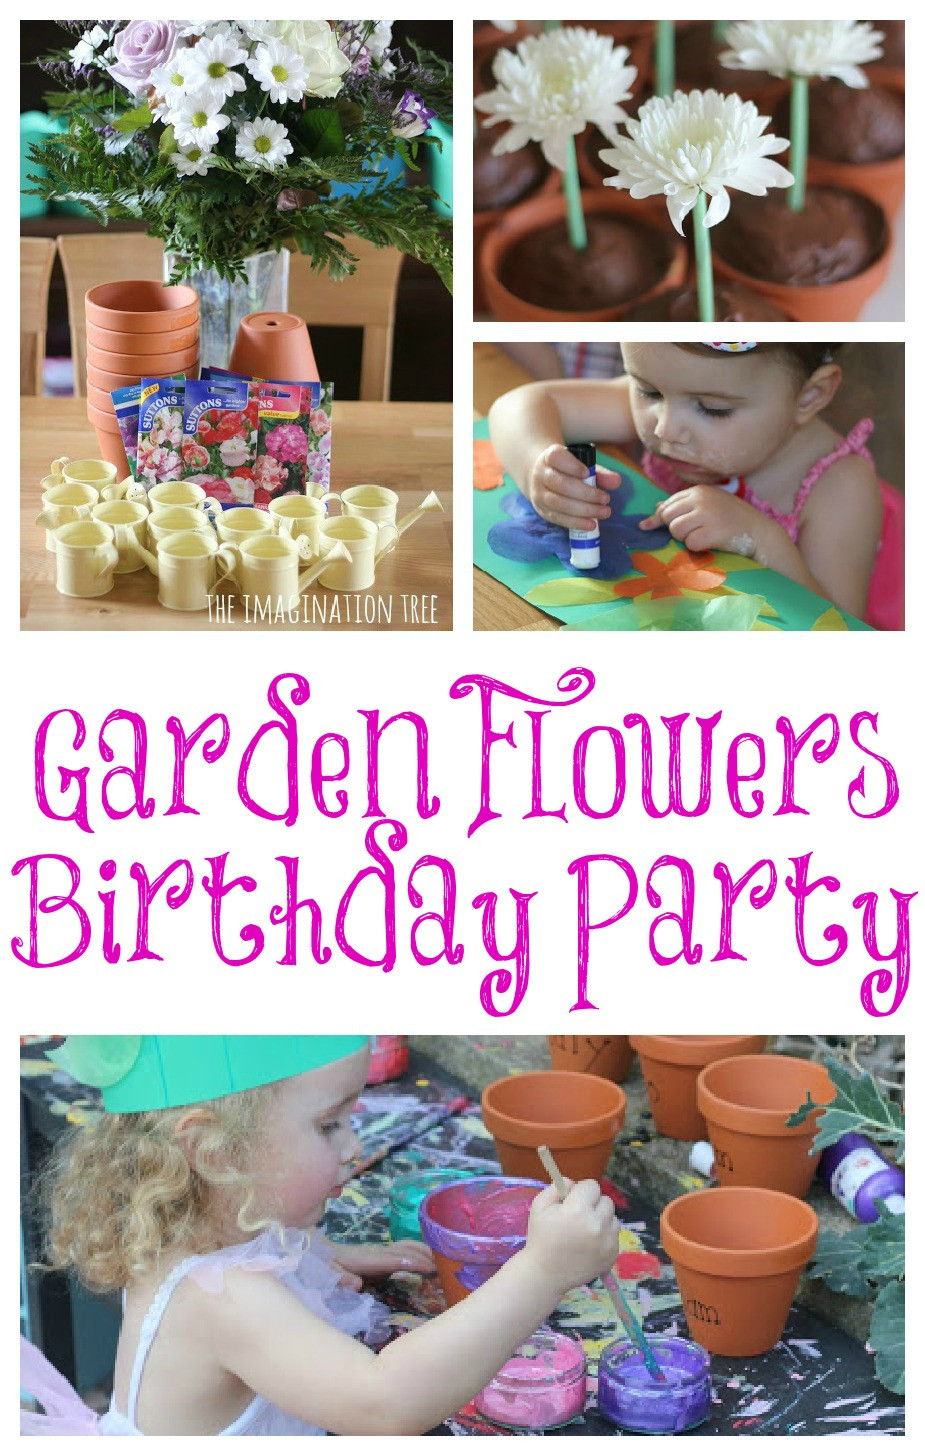 5Th Grade Easter Party Ideas
 15 Spring Activities for Kids The Imagination Tree